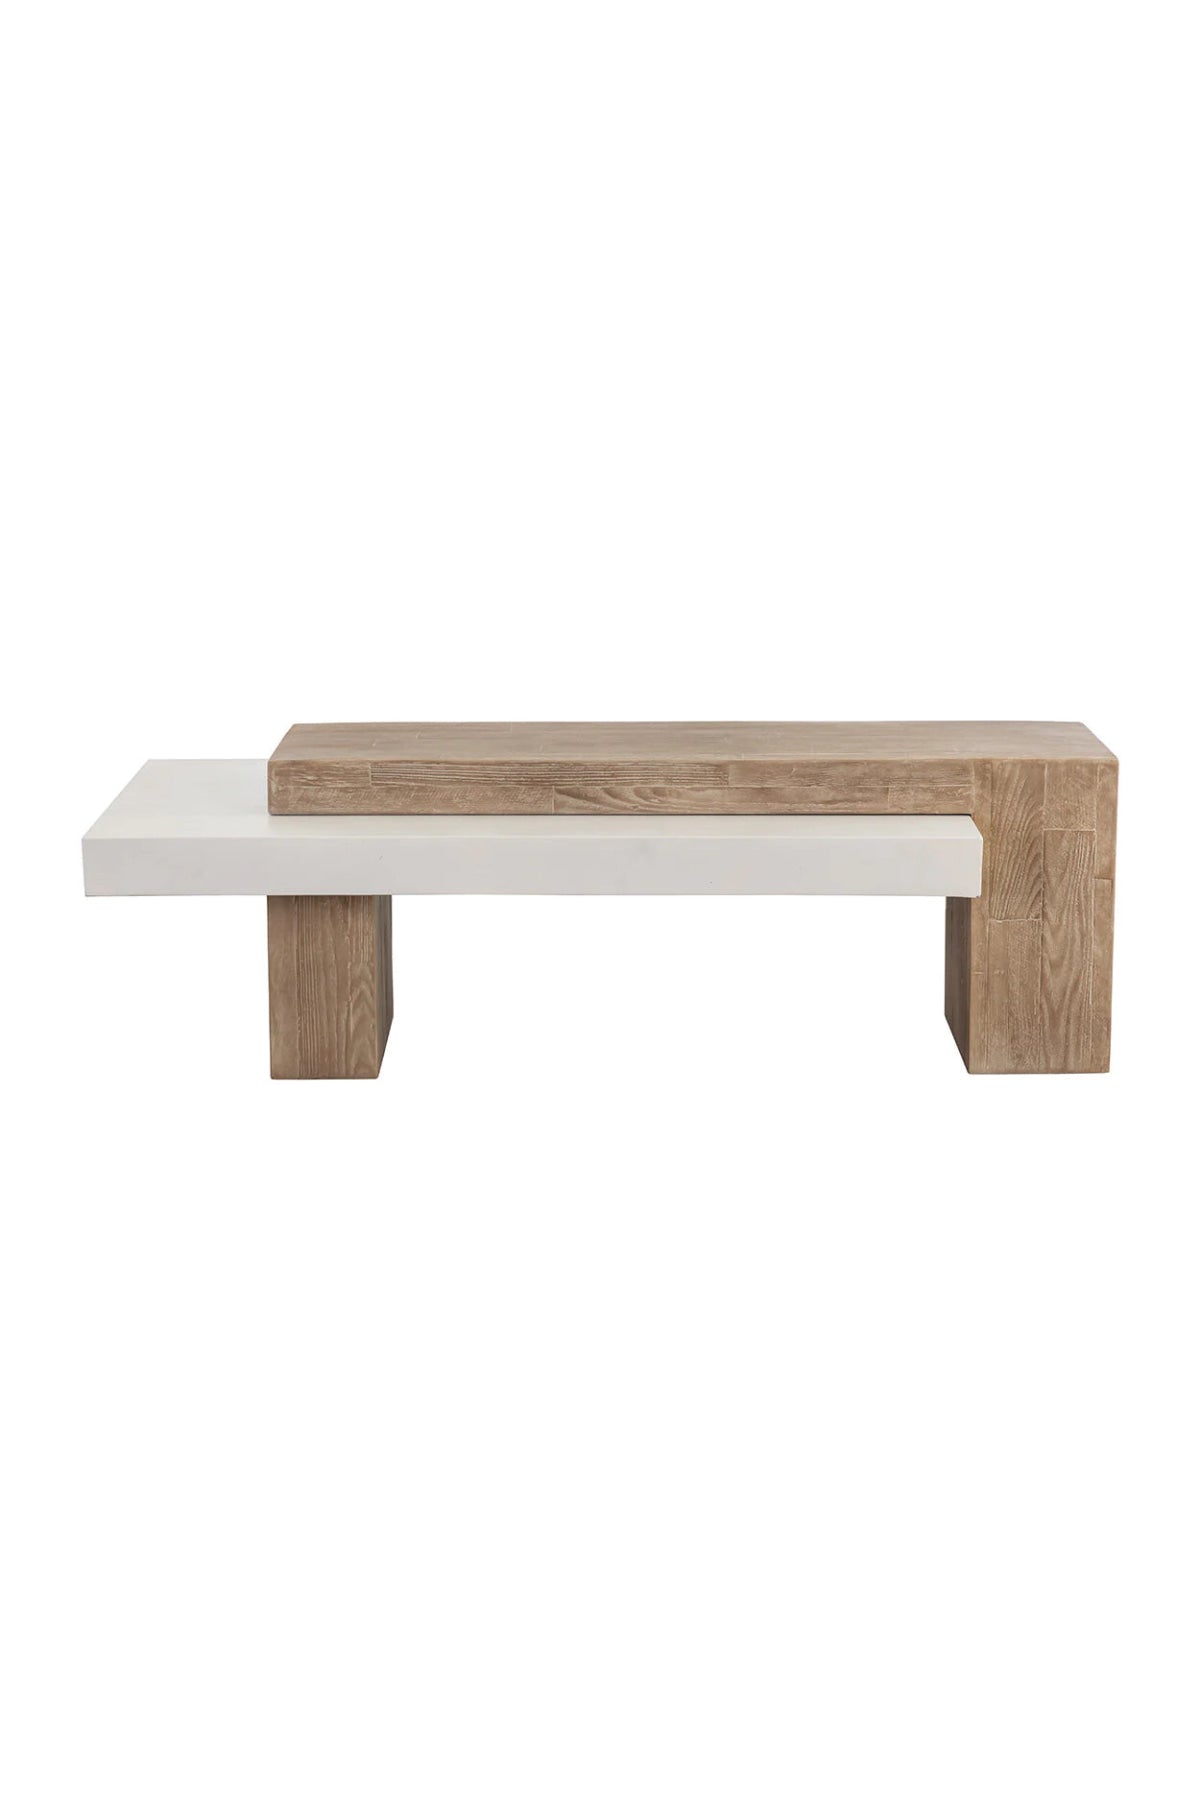 Styles Coffee Table